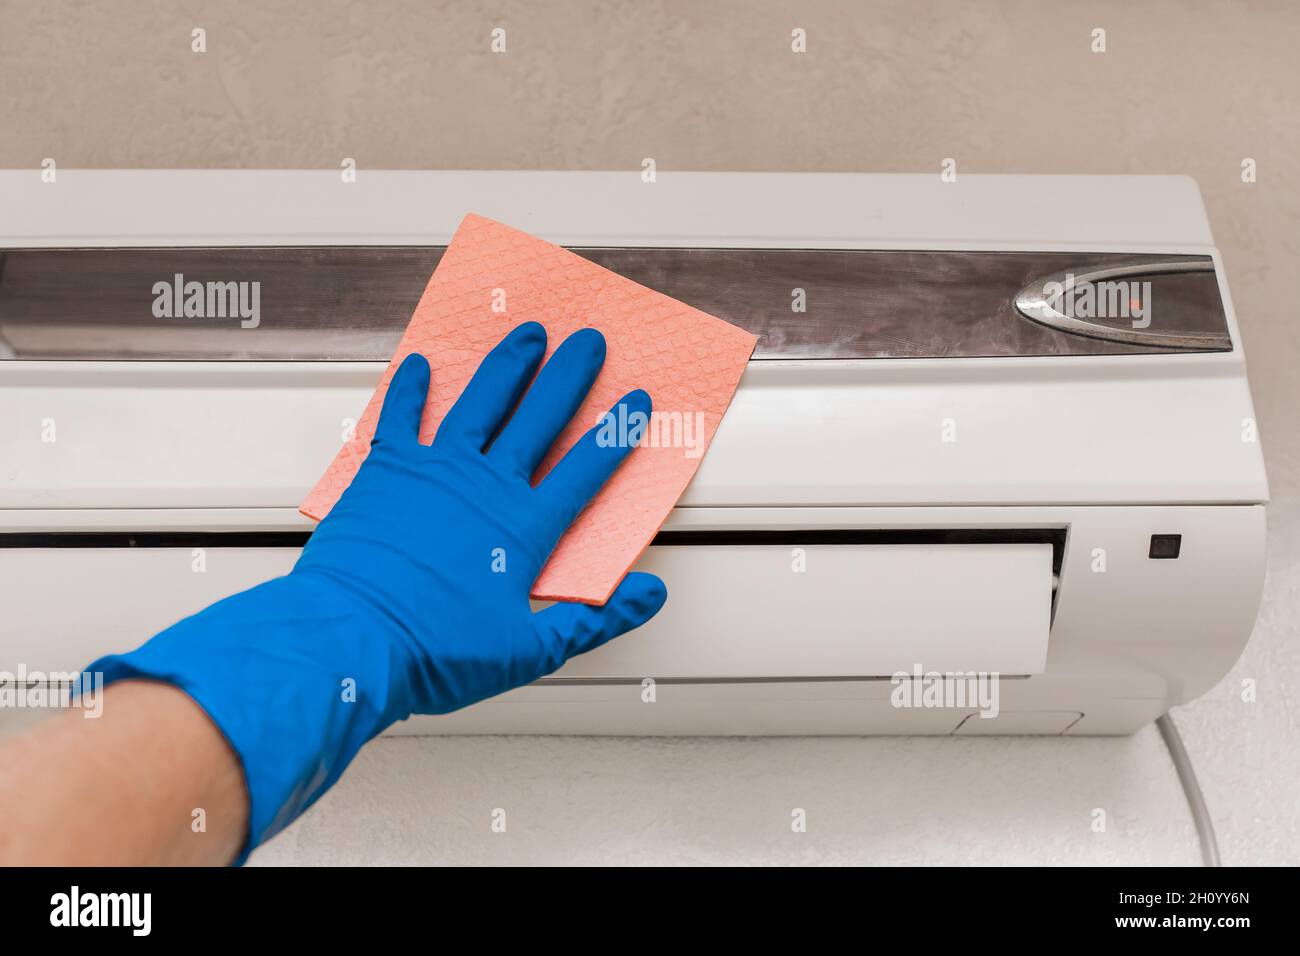 The hand of a man in a blue rubber household glove wipes and cleans the air conditioner. Maintenance and cleaning indoor service. Stock Photo